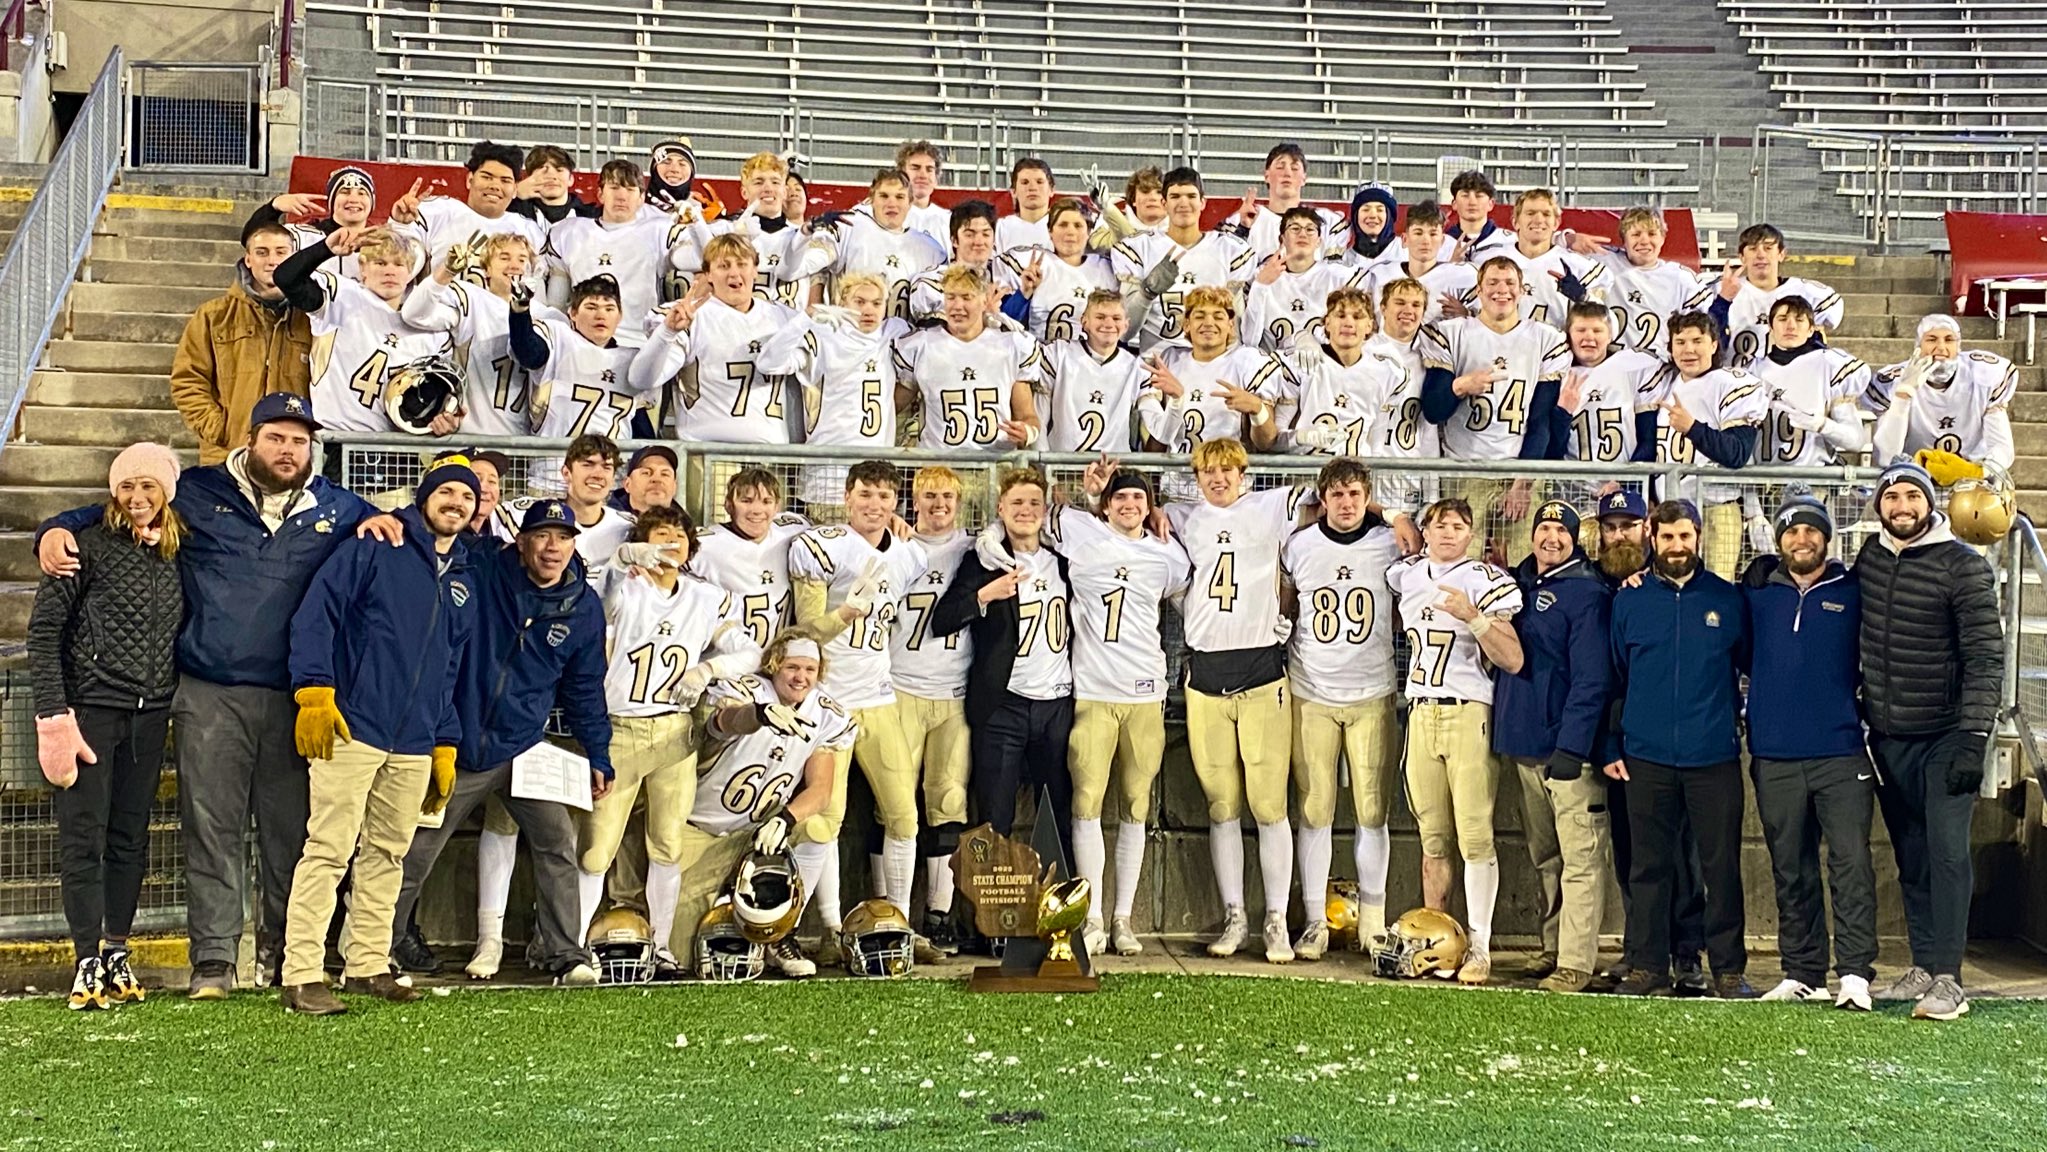 Flottmeyer to Conzemius late TD wins Aquinas second-consecutive state championship